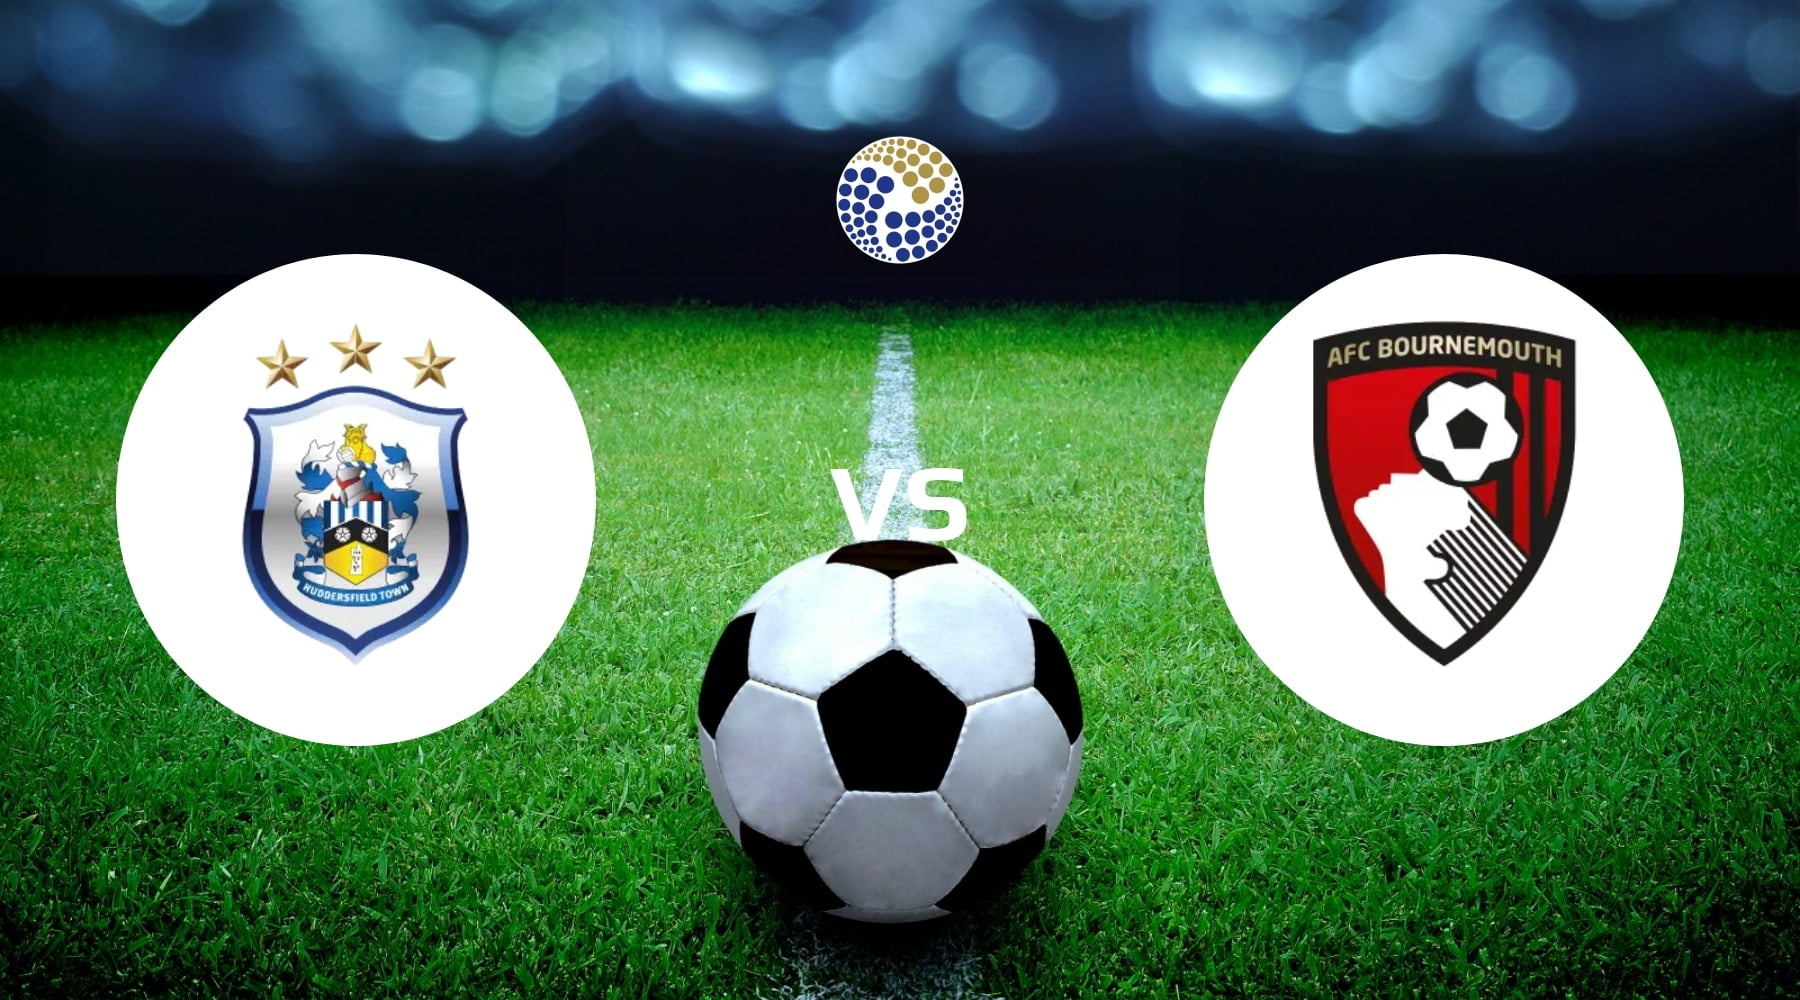 Huddersfield Town vs AFC Bournemouth Betting Tips & Prediction